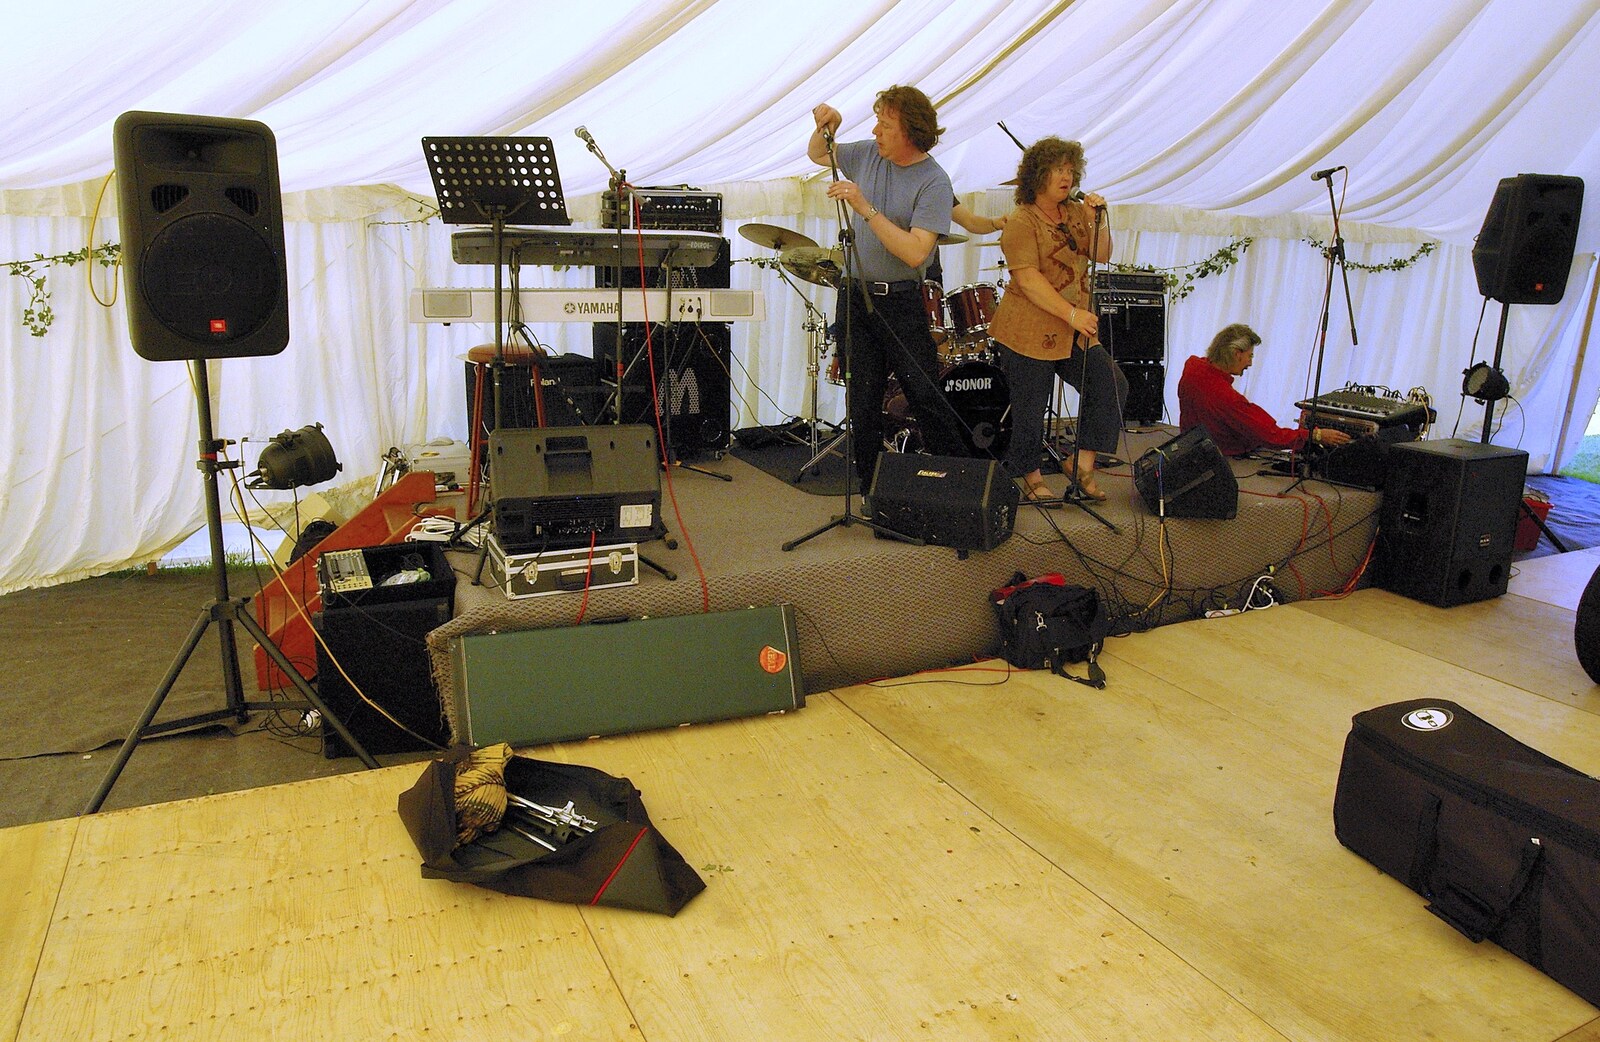 Setting up the gear from The BBs Play Athelington Hall, Horham, Suffolk - 29th June 2006